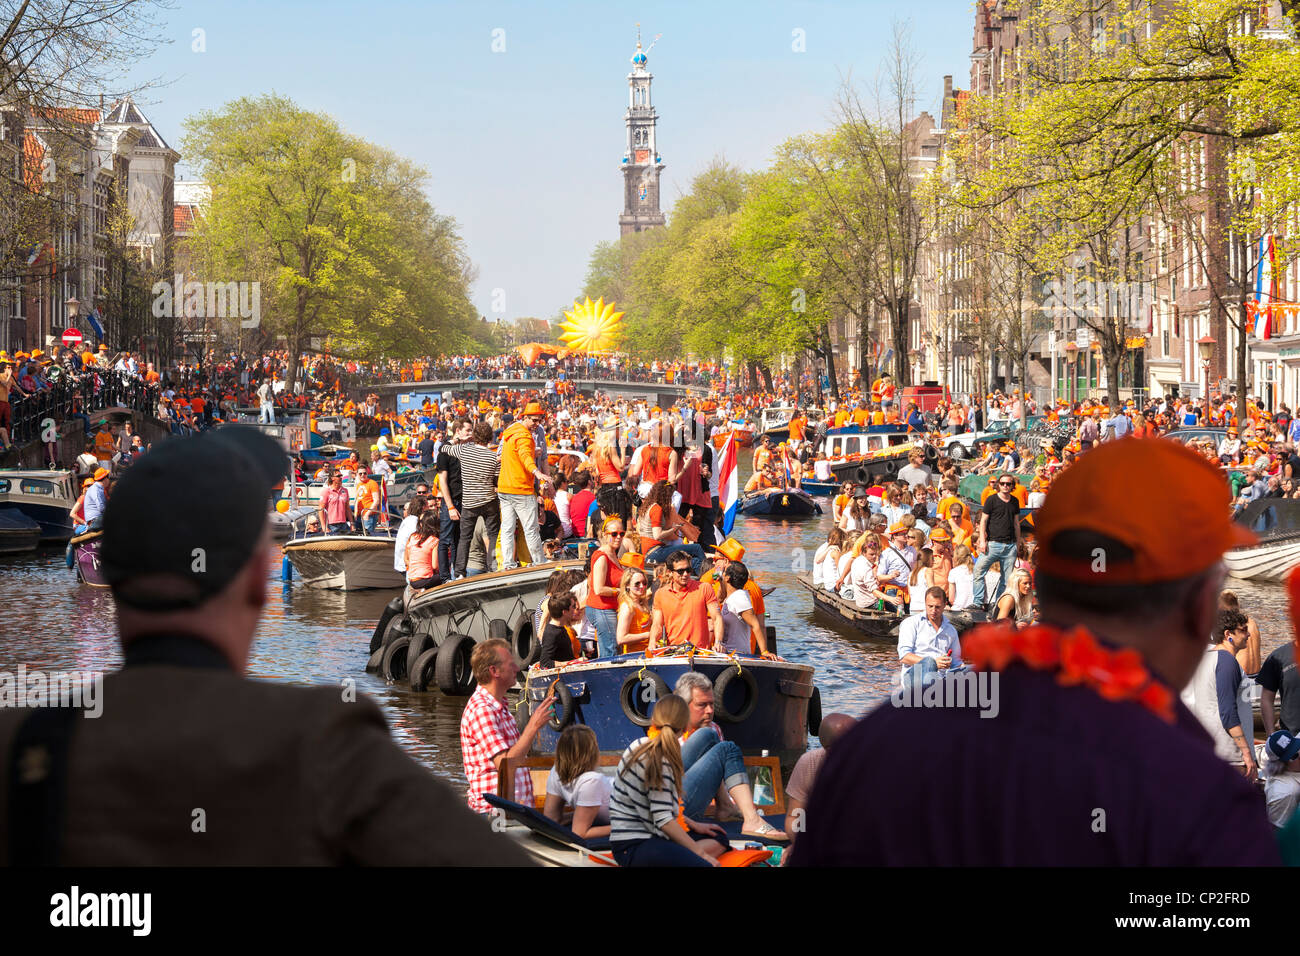 Kingsday Kings Day King's Day in Amsterdam. Canal Parade in the Prinsengracht. Boats people wearing orange, partying. Stock Photo